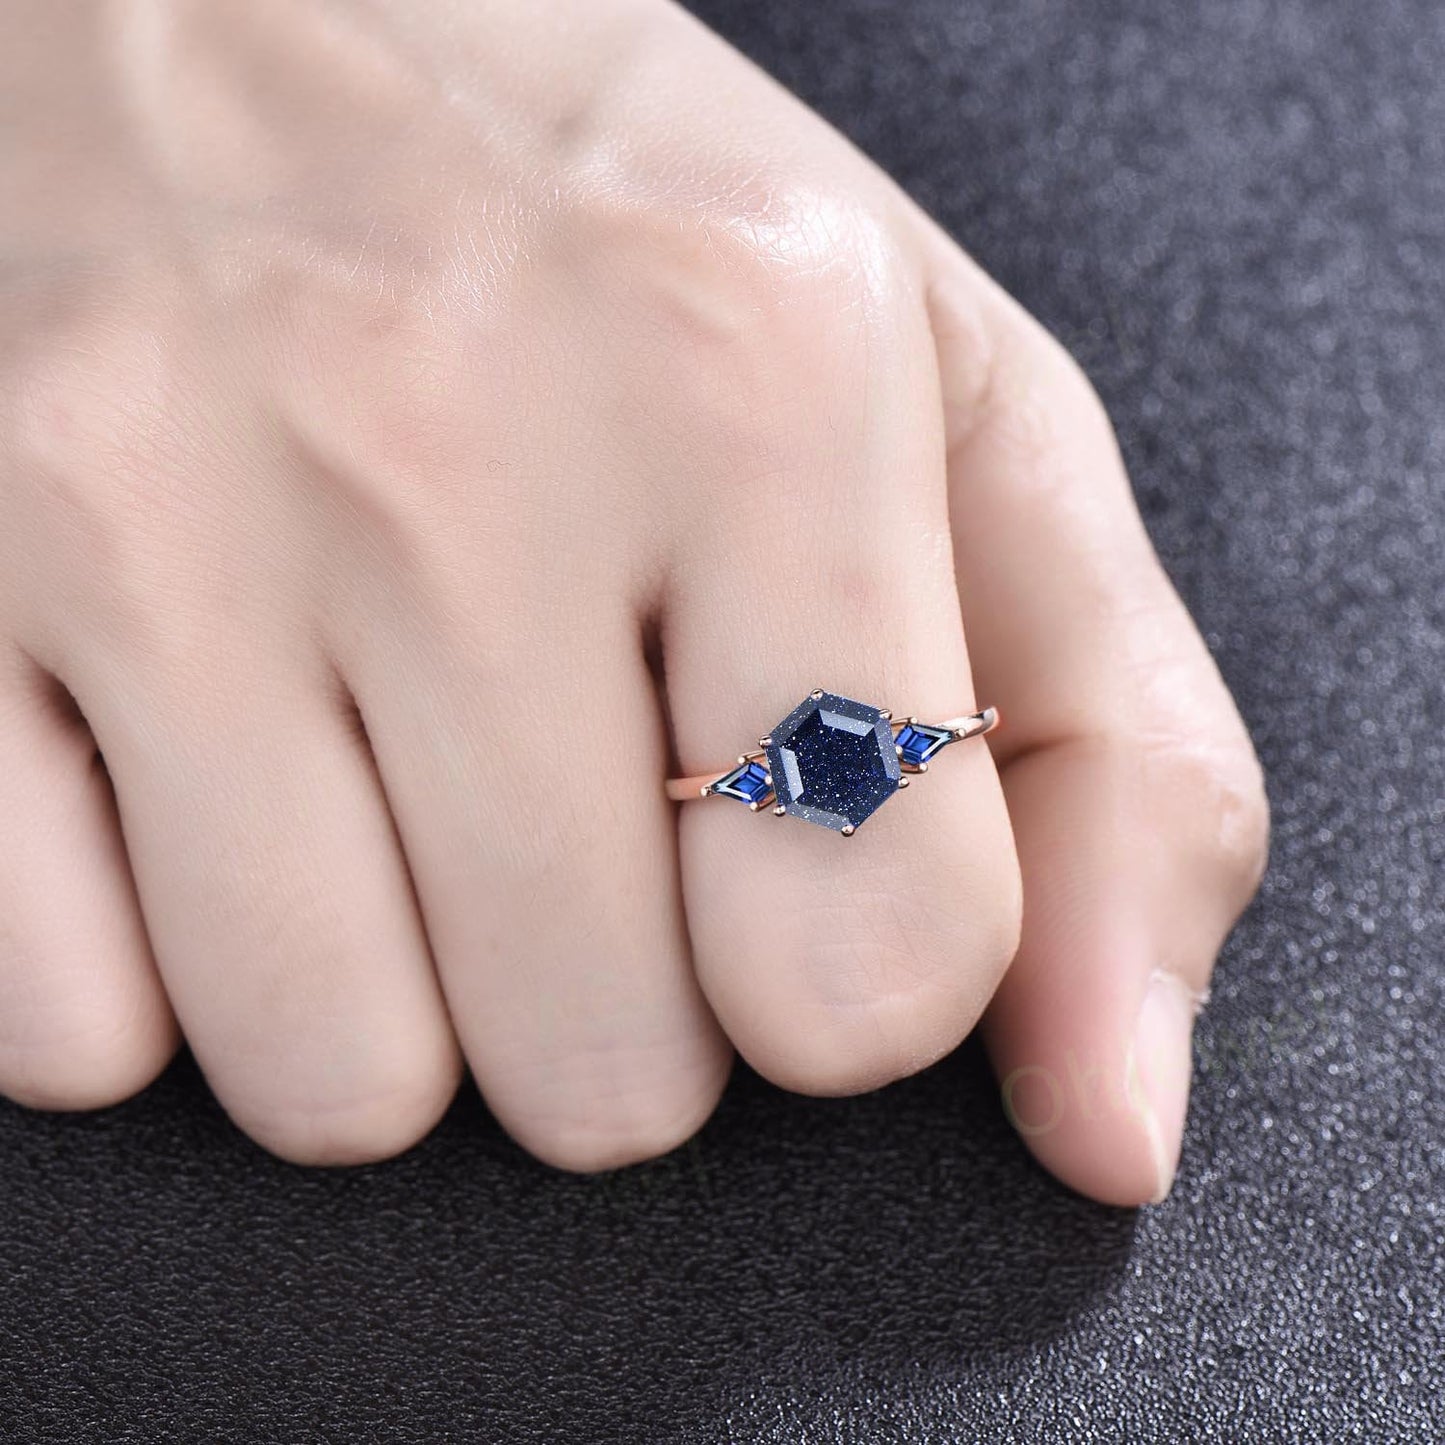 Hexagon cut blue sandstone ring three stone kite cut sapphire ring rose gold unique engagement ring women Minimalist 6 prong promise ring